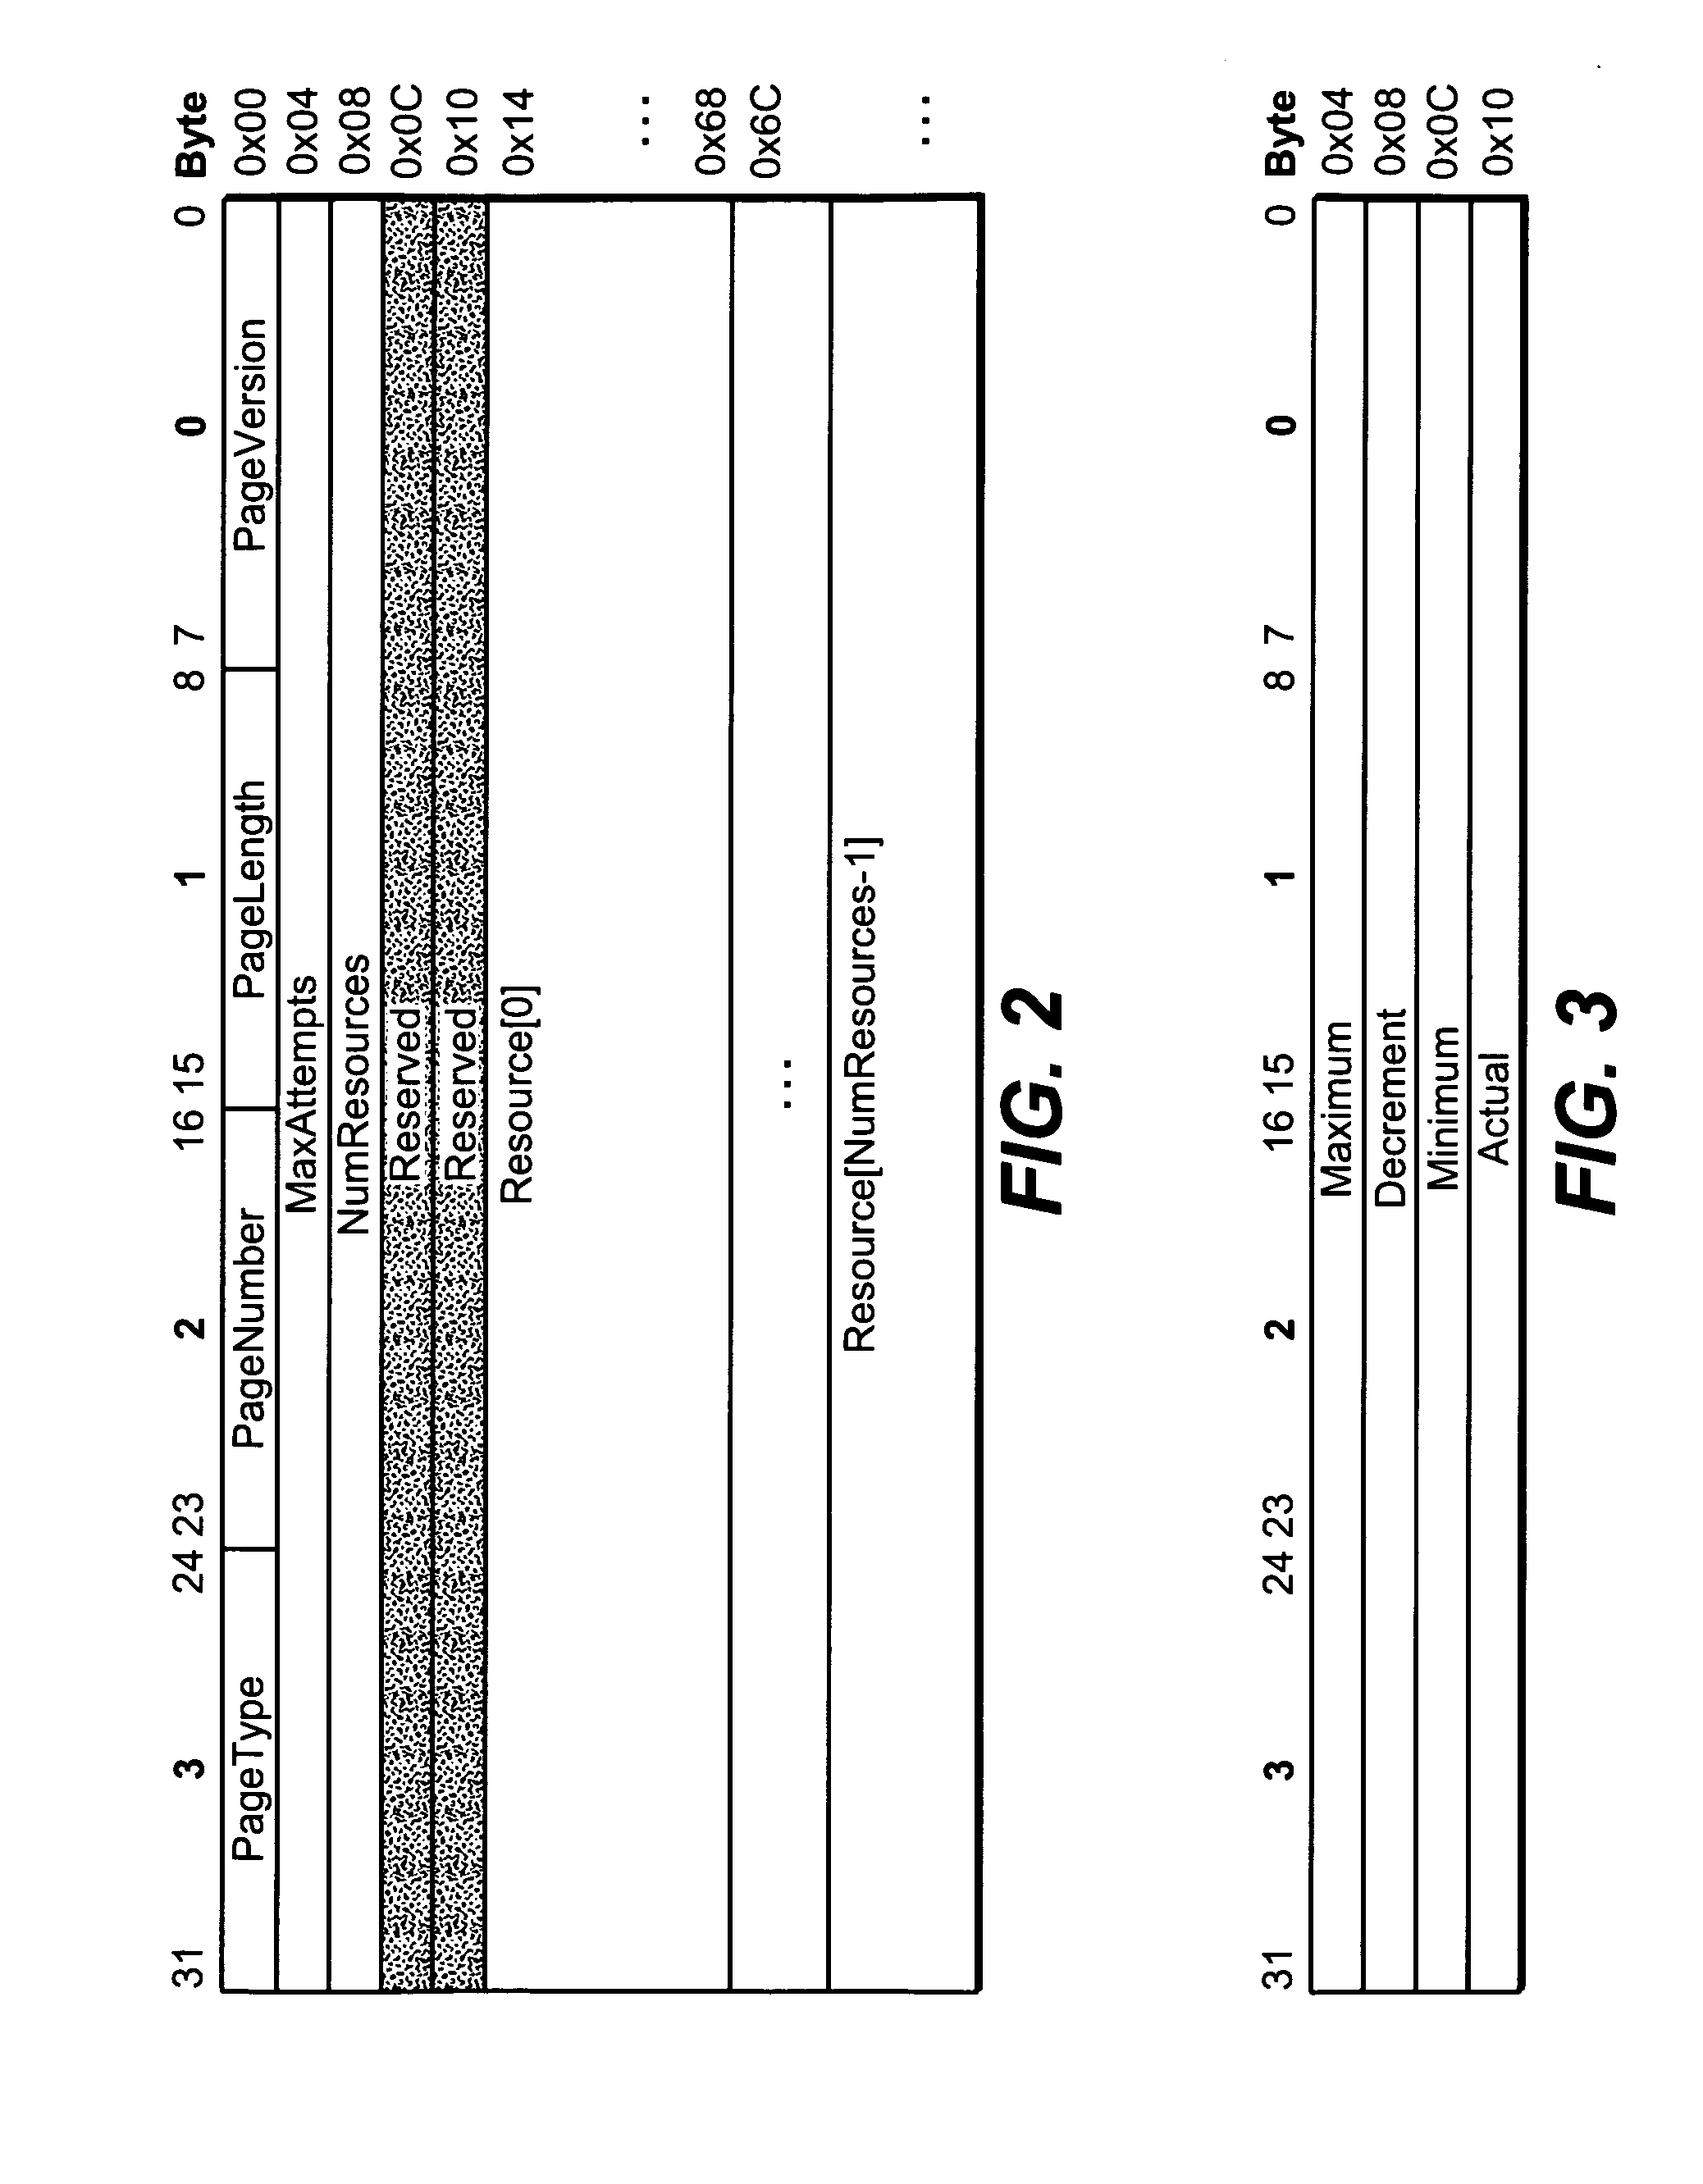 System and method for optimal dynamic resource allocation in a storage system